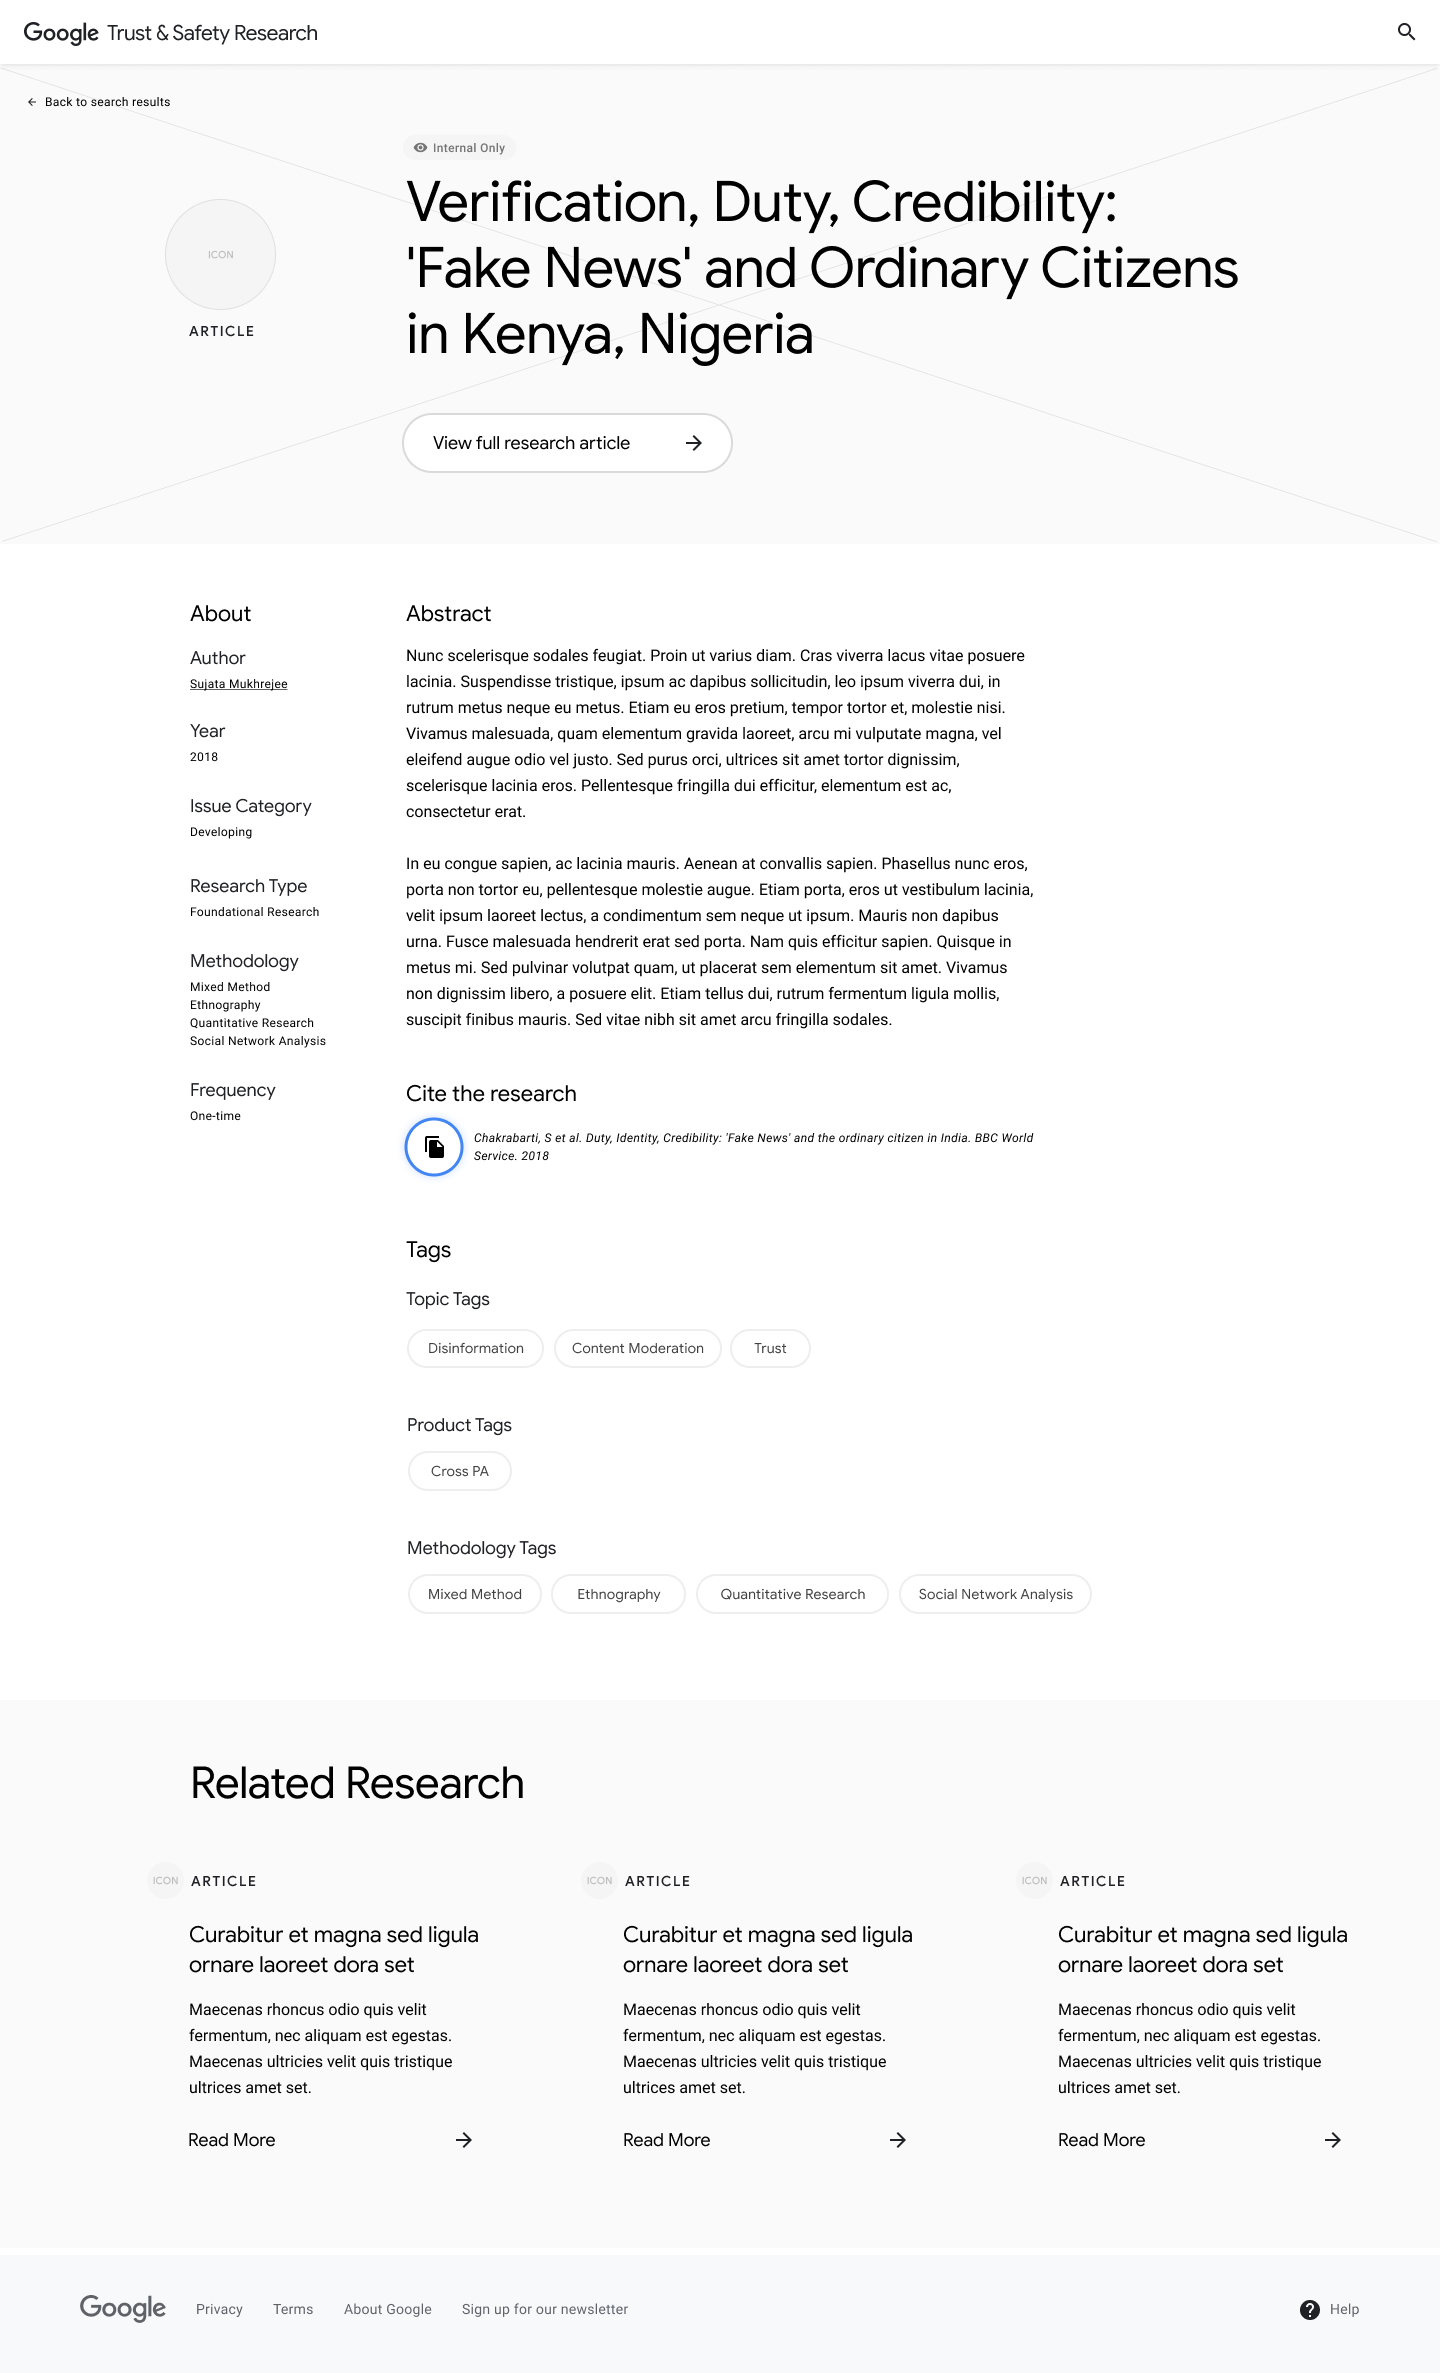 Research Article page with the 'Copy to clipboard' button highlighted